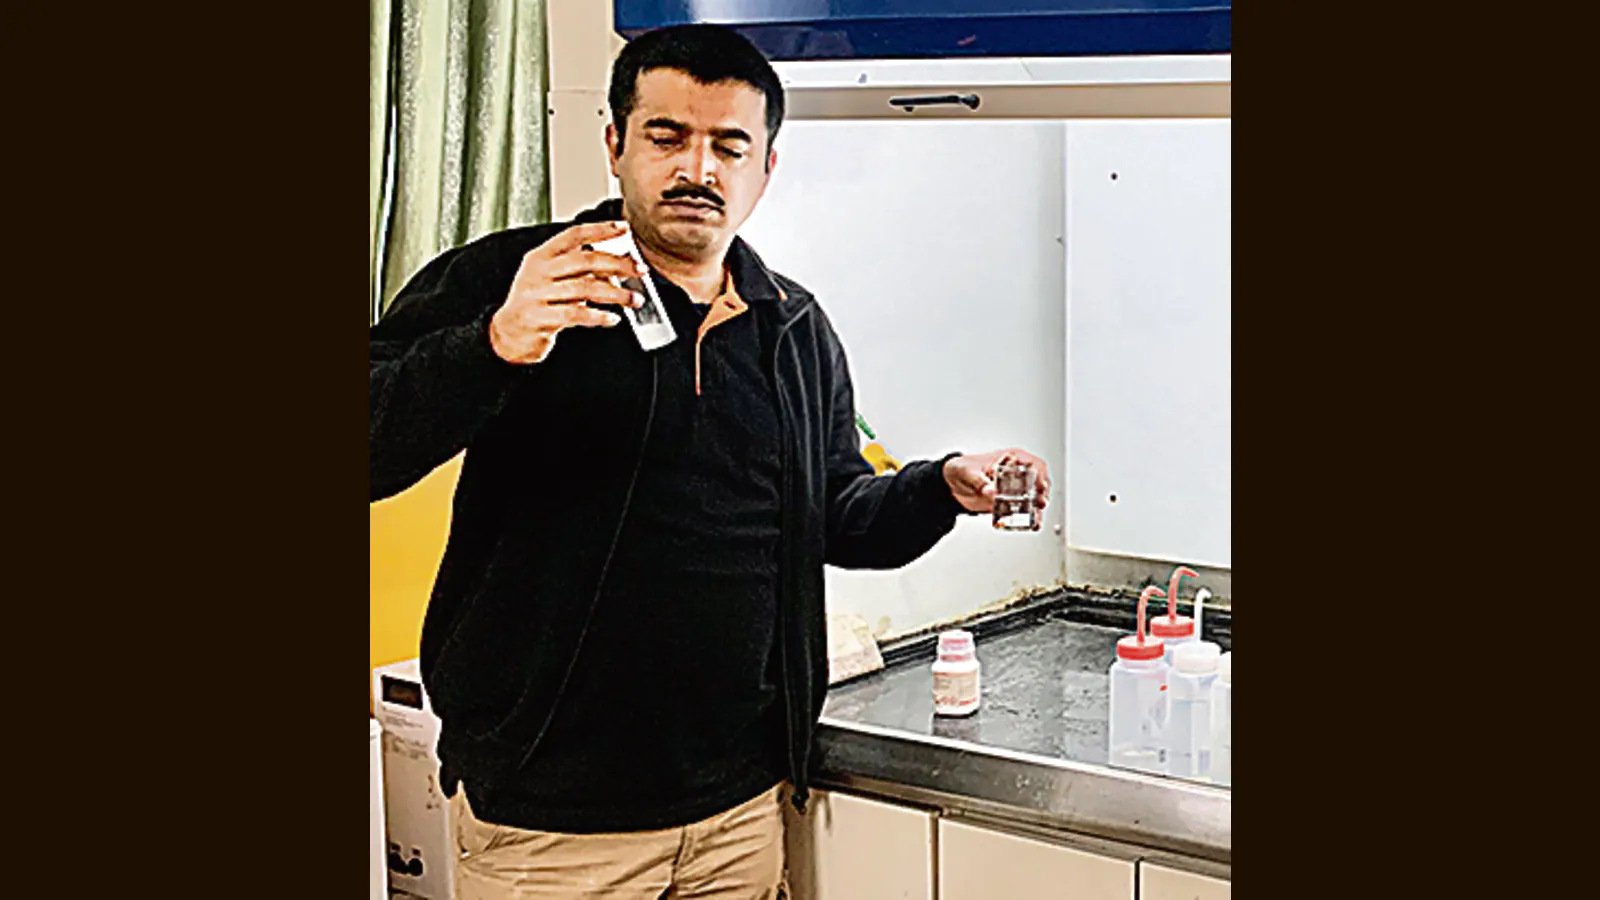 At a boiling point: Meet the IIT Patna professor who is a bubble whisperer